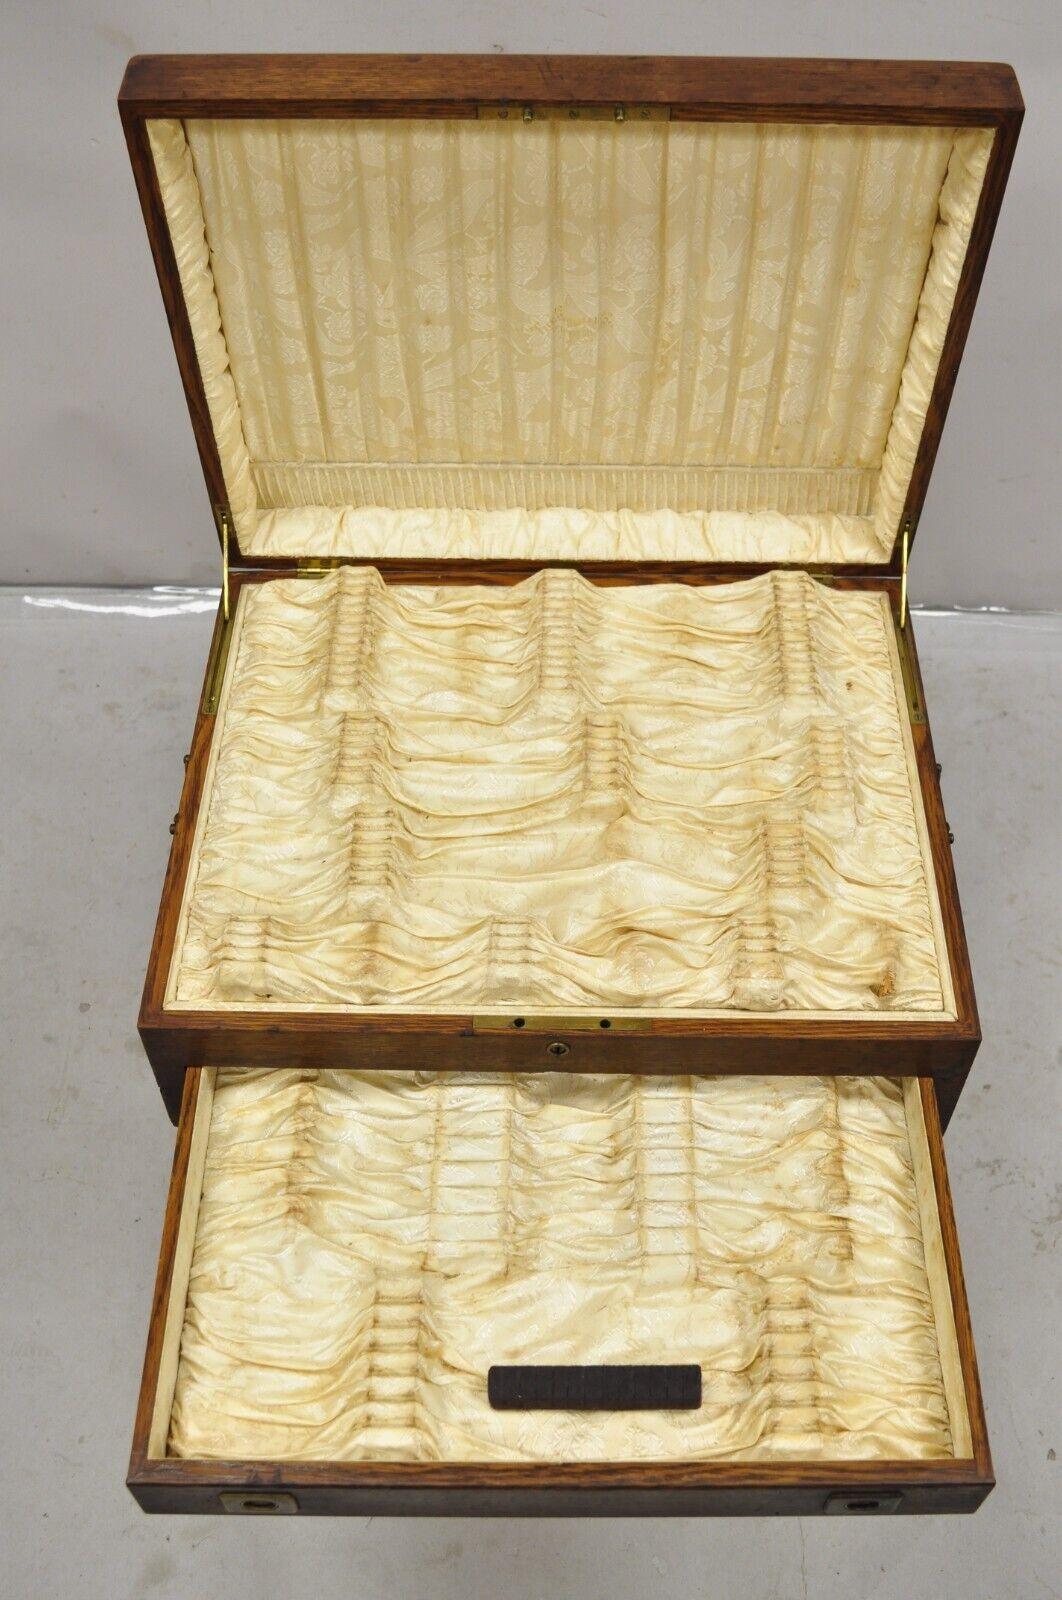 Antique Edwardian Oak Wood Large Silverware Flatware Chest with Drawer 1